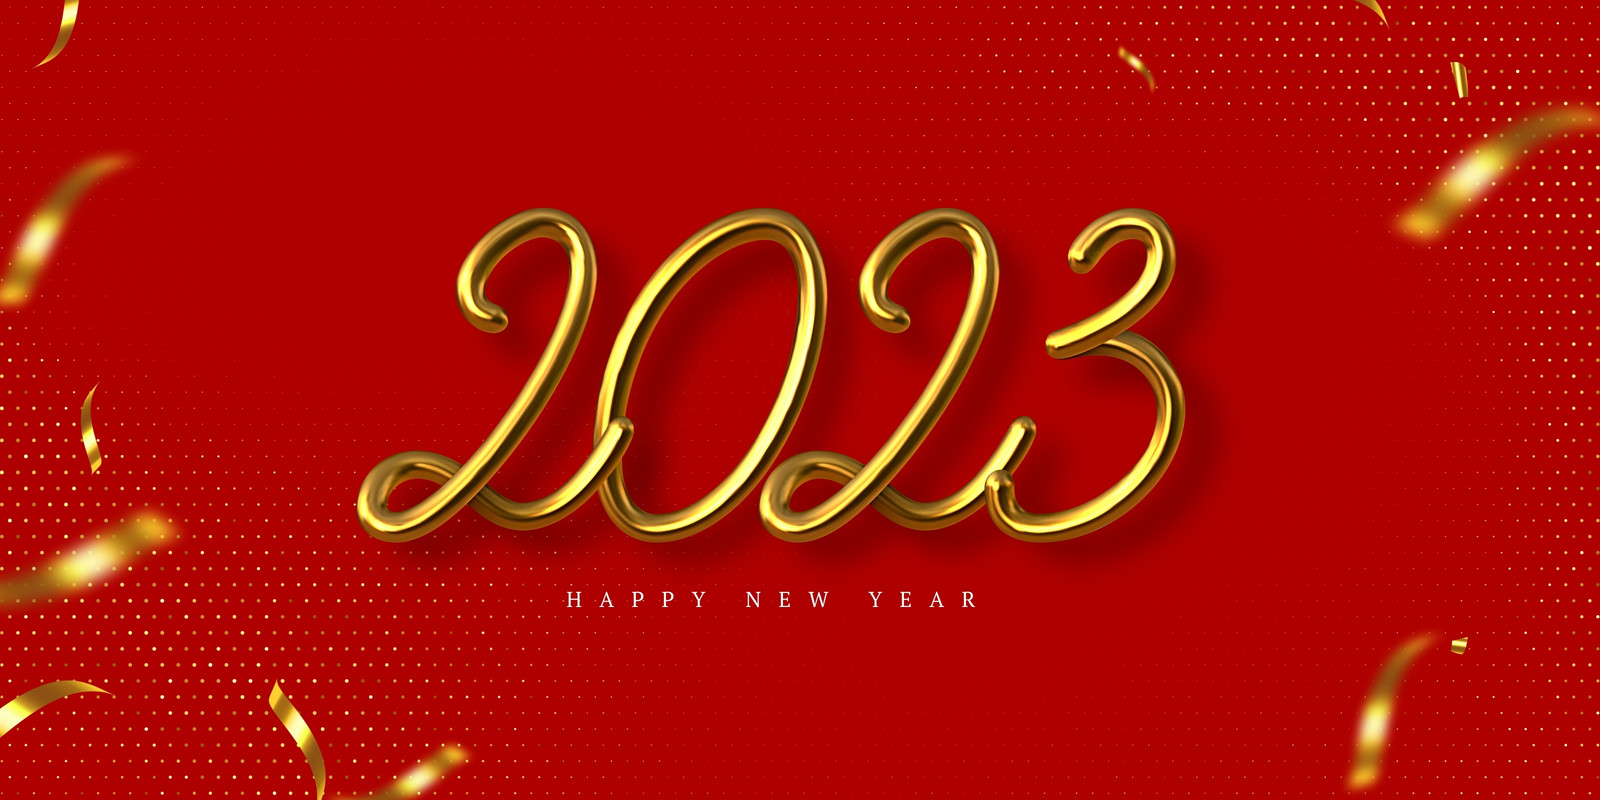 Page 12 - Free New Year banner templates to edit and print | Canva